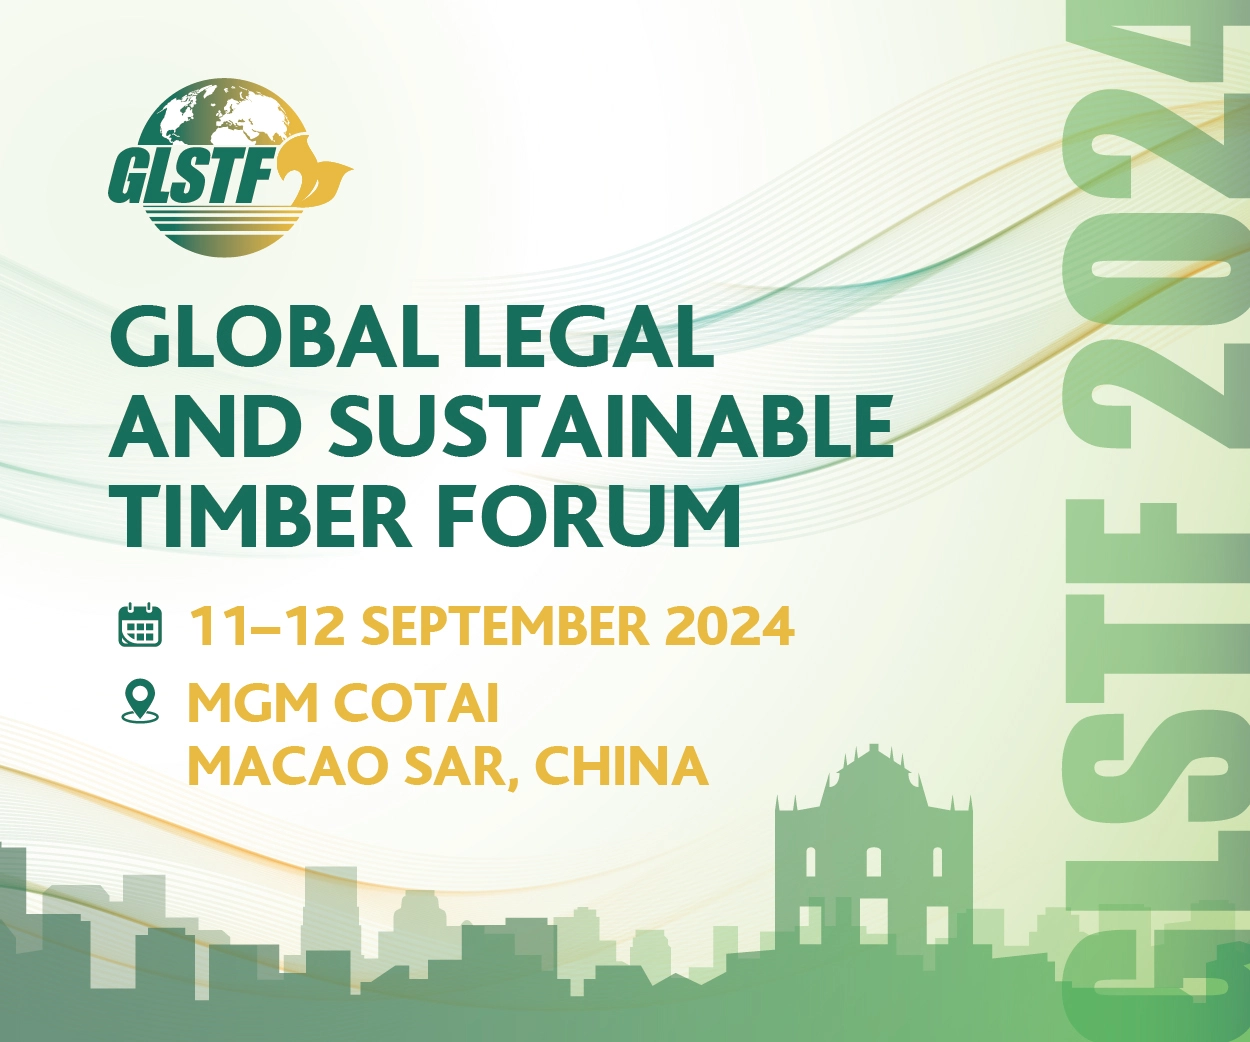 Global Legal and Sustainable Timber Forum, GLSTF 2024